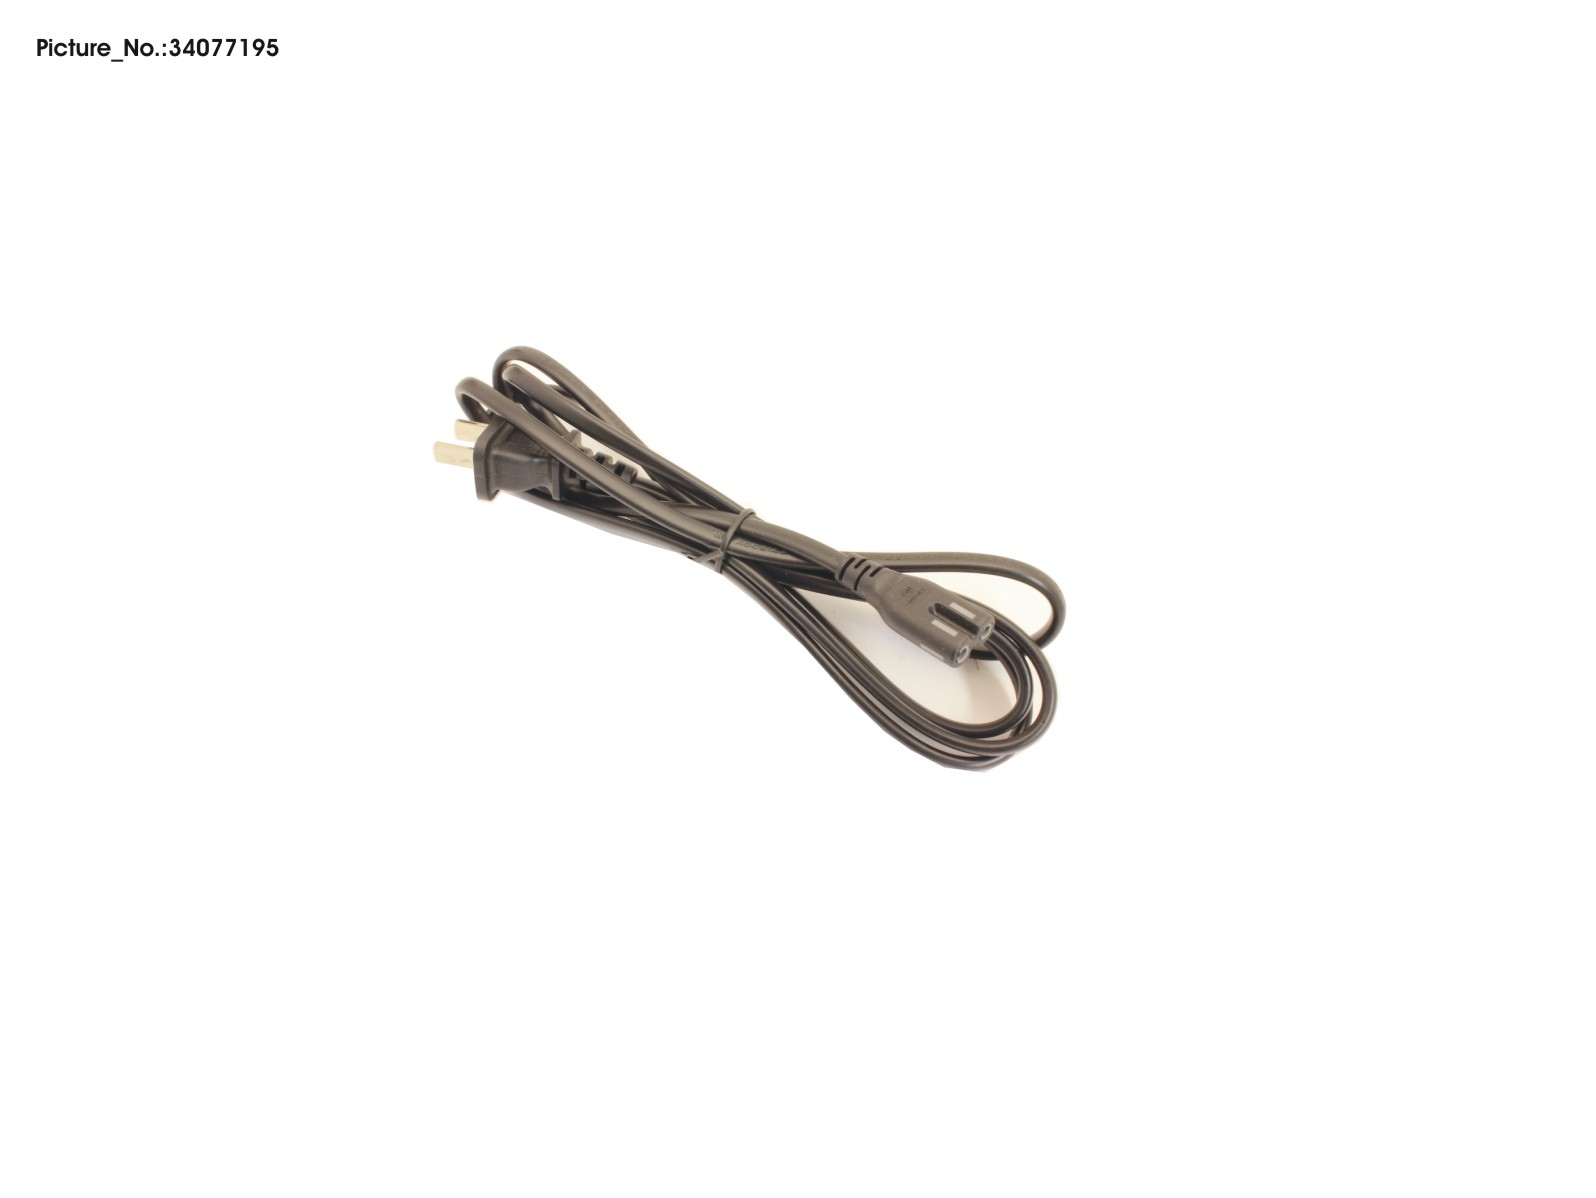 CABLE POWER 2-PIN (US) 1,8M